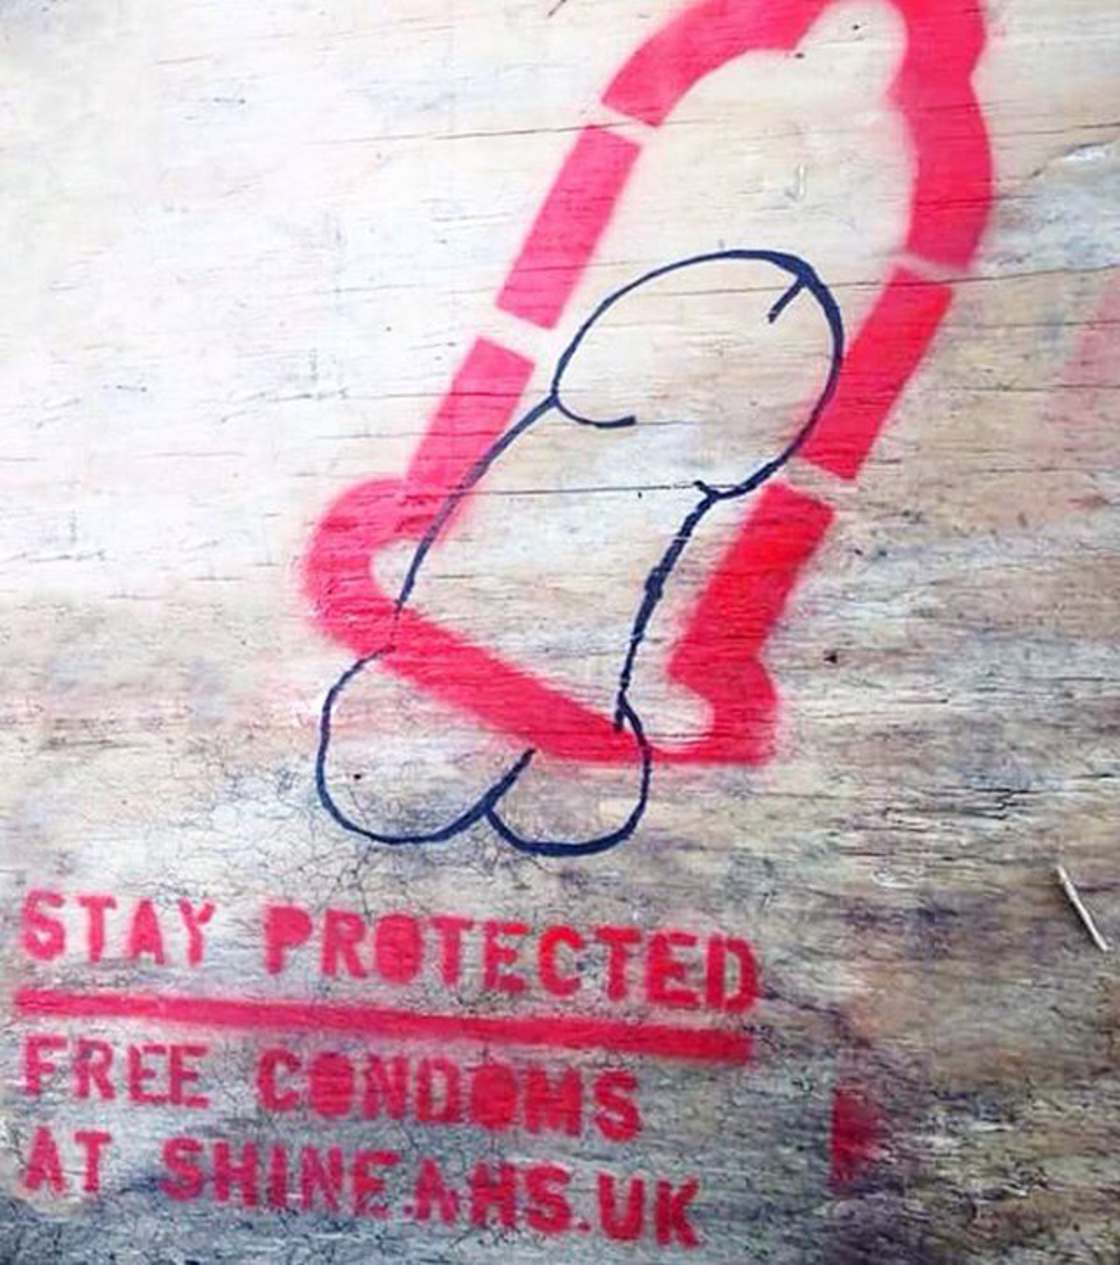 Stay Protected – Protecting Penises on Walls by Stencil Condoms